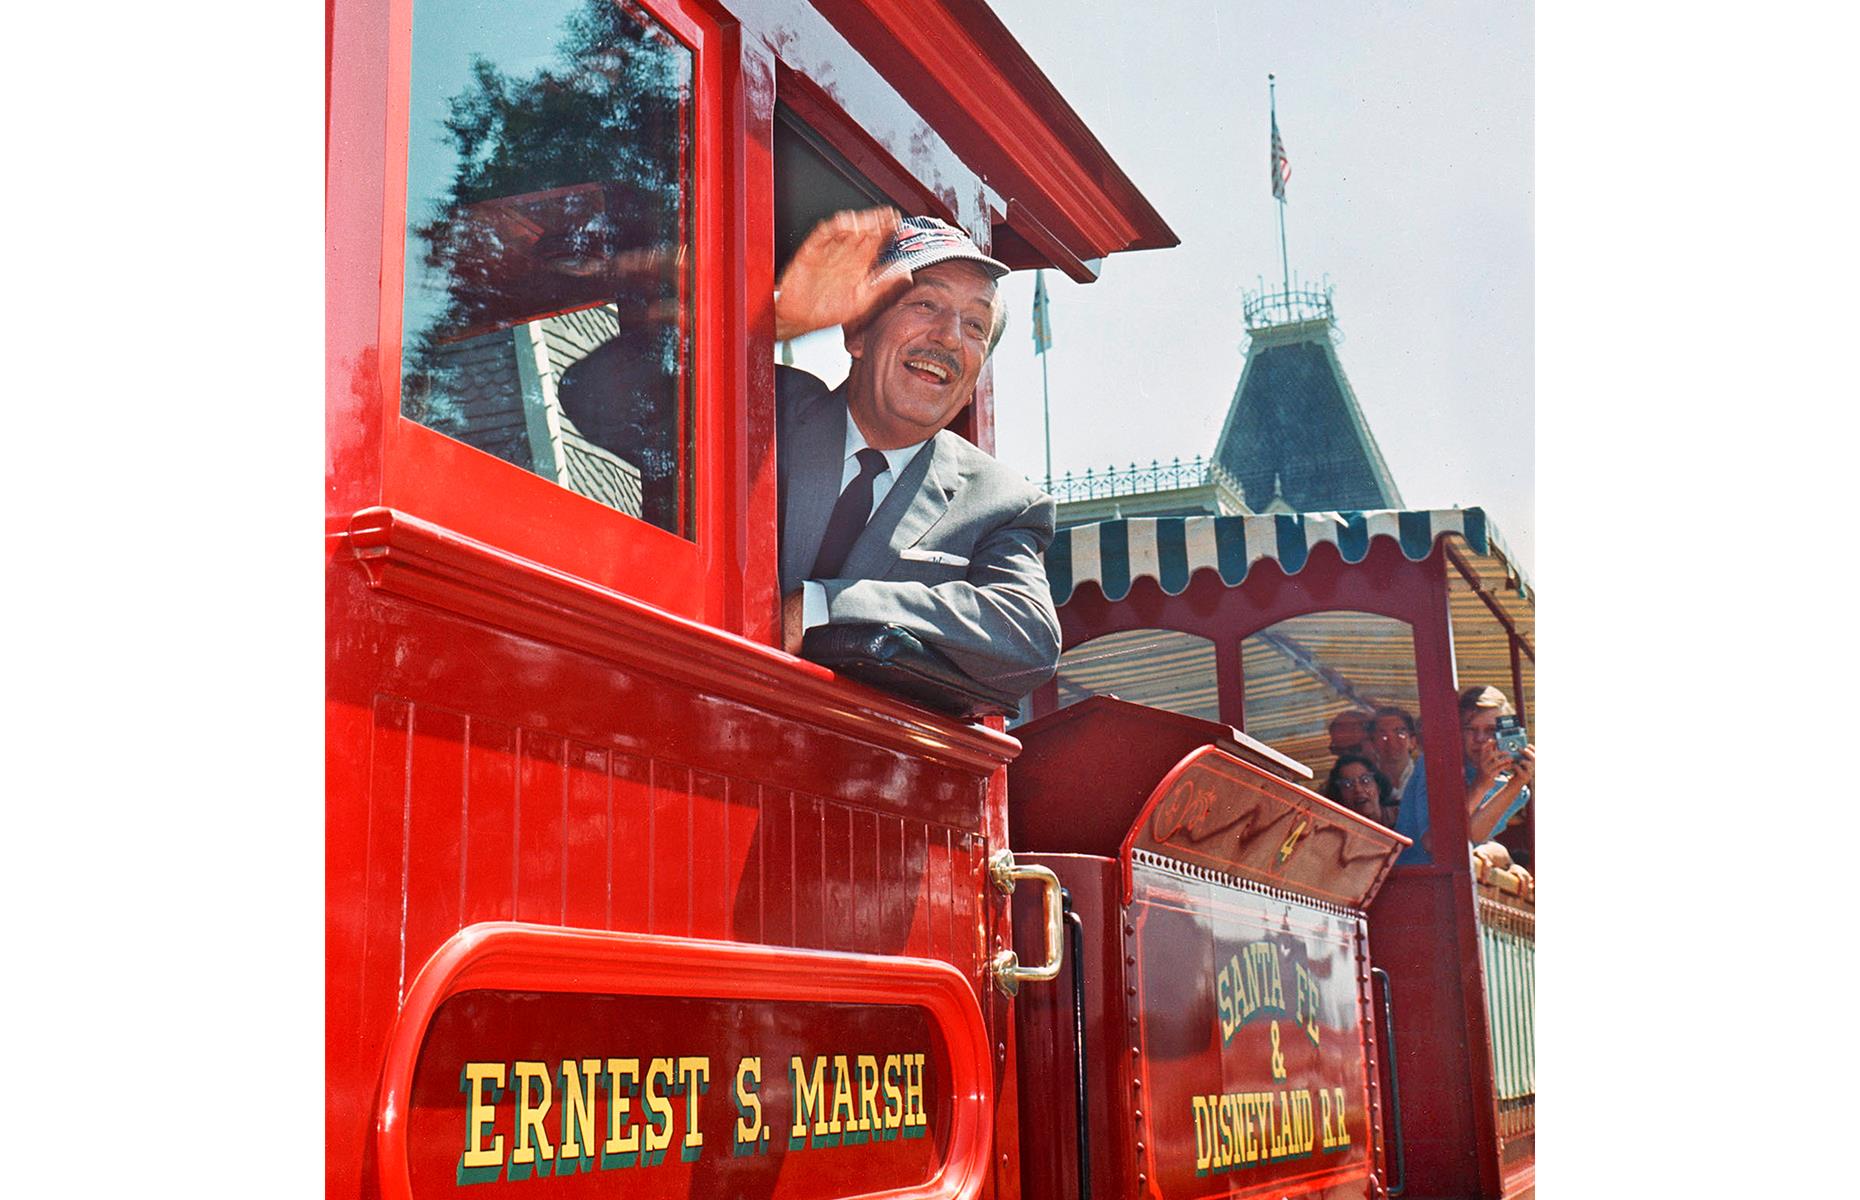 Even when he wasn't entertaining his family, Walt Disney himself was still regularly seen in the California park through the 1950s and early 1960s (Disney passed away in 1966). Rumored to be Disney's favorite attraction, the Disneyland Railroad (once the Santa Fe and Disneyland Railroad) sliced through the park, bypassing scenic attractions like the Rivers of America and the Grand Canyon Diorama. Guests can still ride the railroad's nostalgic steam trains today.